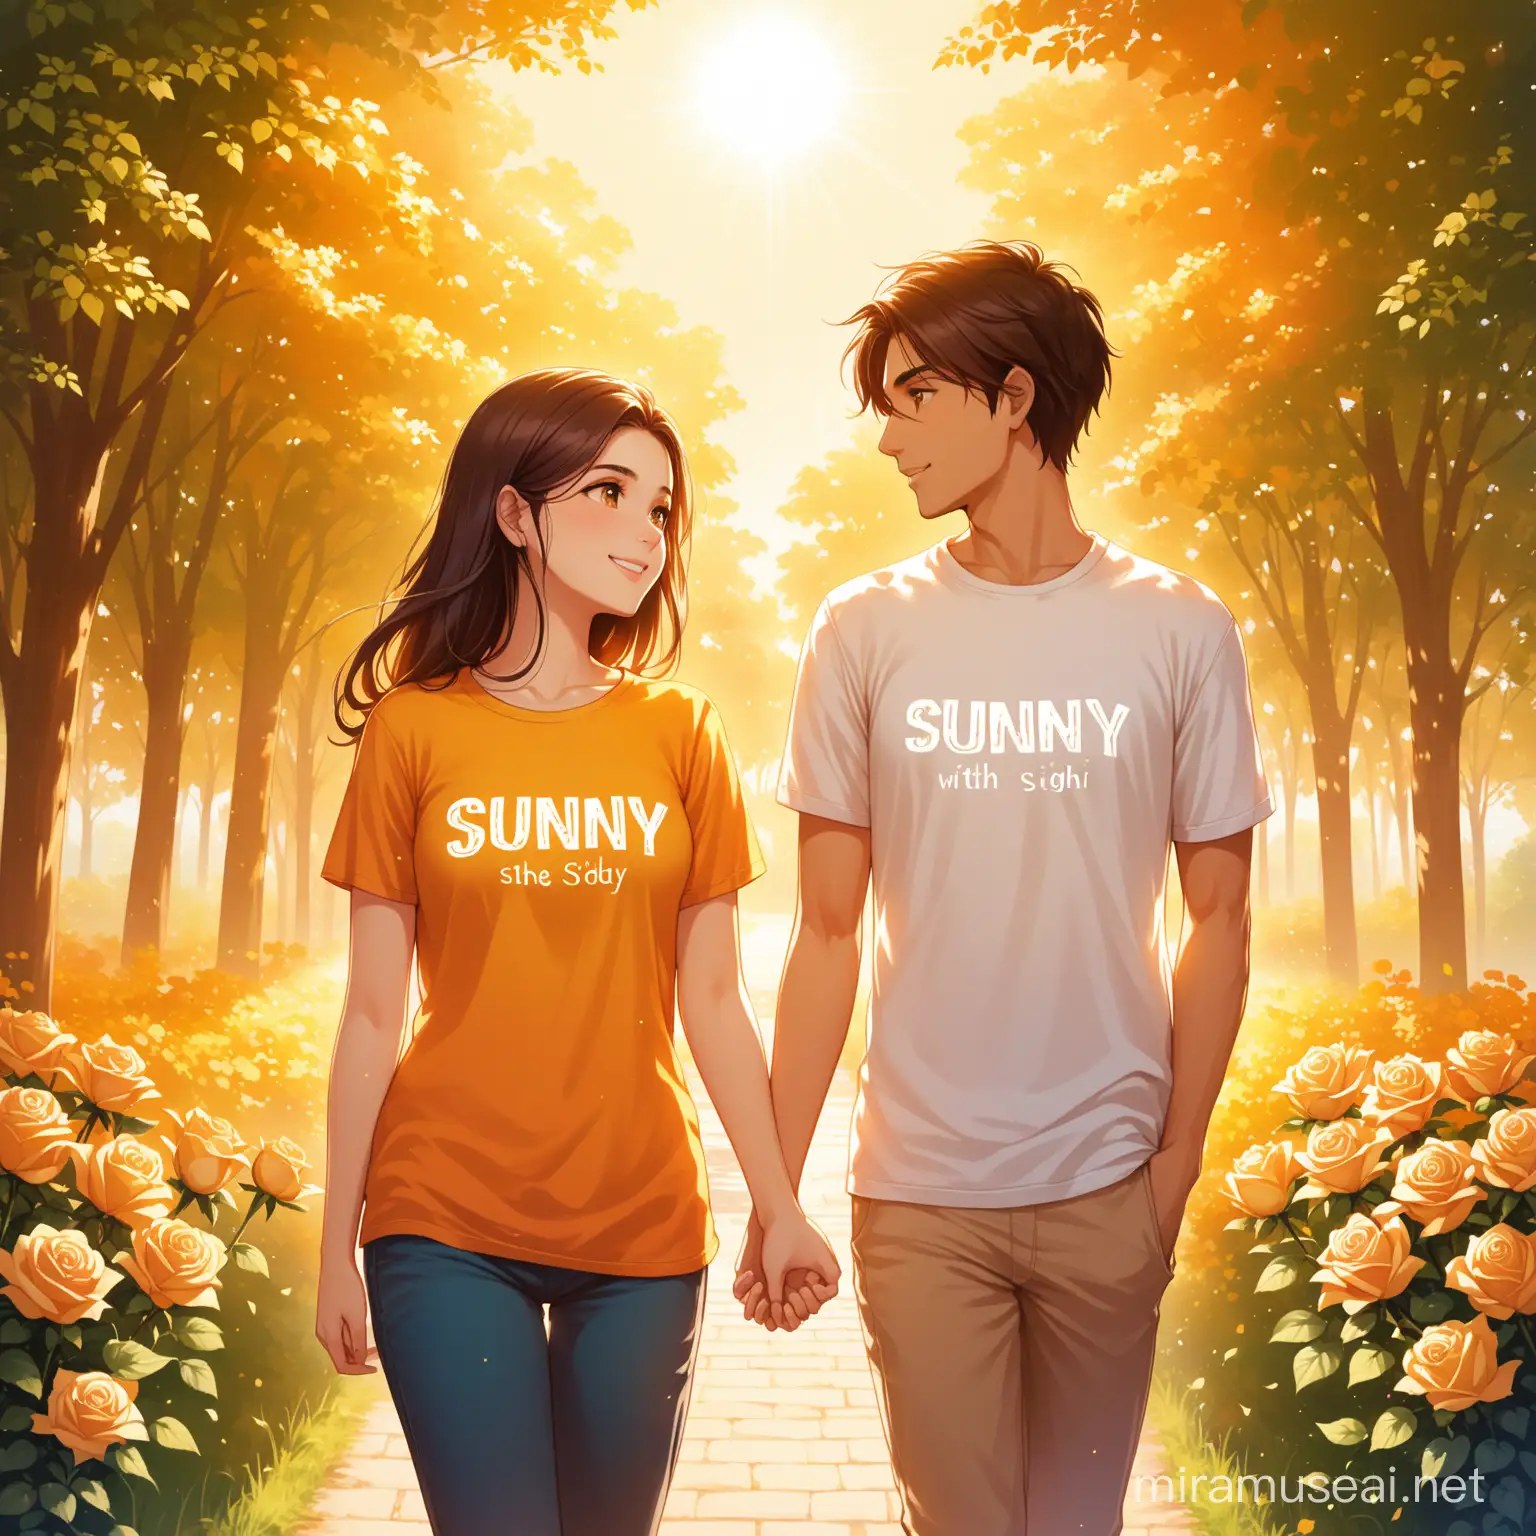 Imagine a sunny day with two people standing close together. The first person is wearing a T-shirt with the word "Sunny" printed on it, radiating warmth and cheerfulness. The second person, a girl named Siddhi, is wearing a T-shirt with her name printed on it, accompanied by a beautiful rose design. As they stand side by side, the sunny atmosphere complements the vibrant colors of their T-shirts, creating a picturesque moment filled with joy and affection.